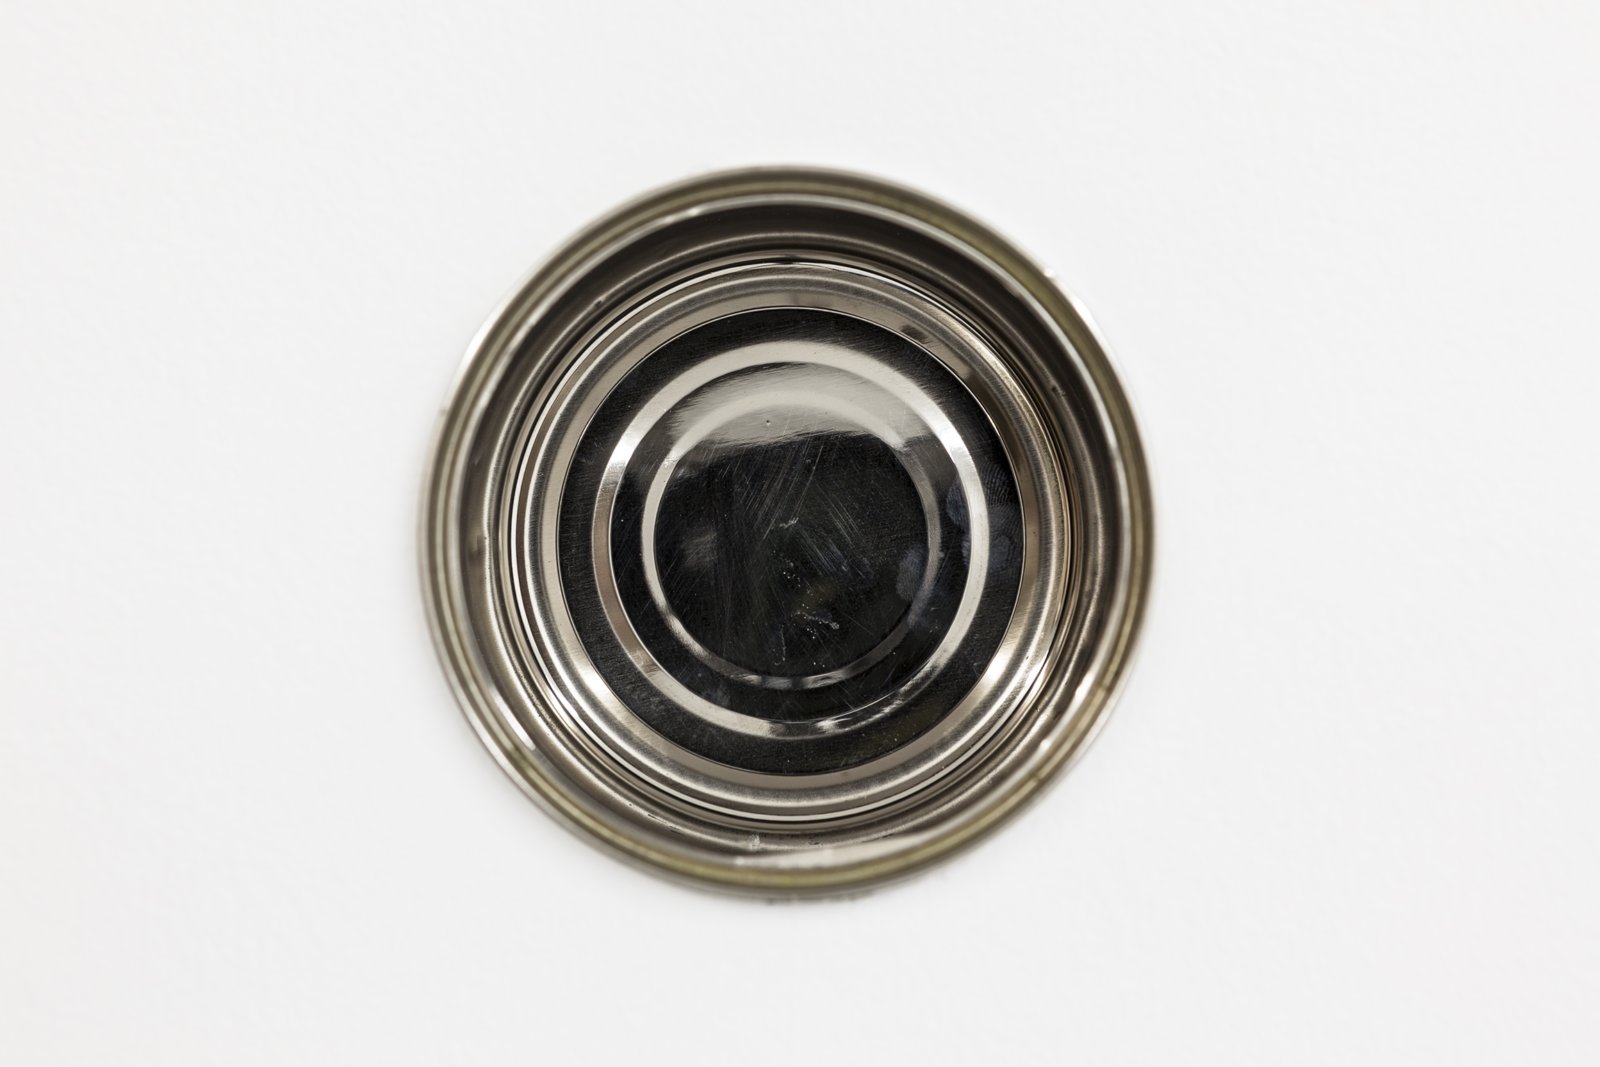 Rochelle Goldberg, Tan of Cuna, 2013, mirror finished tuna can, 3 x 3 x 2 in. (9 x 9 x 4 cm). Installation view, Descartes’ Daughter, Swiss Institute, New York, USA, 2013